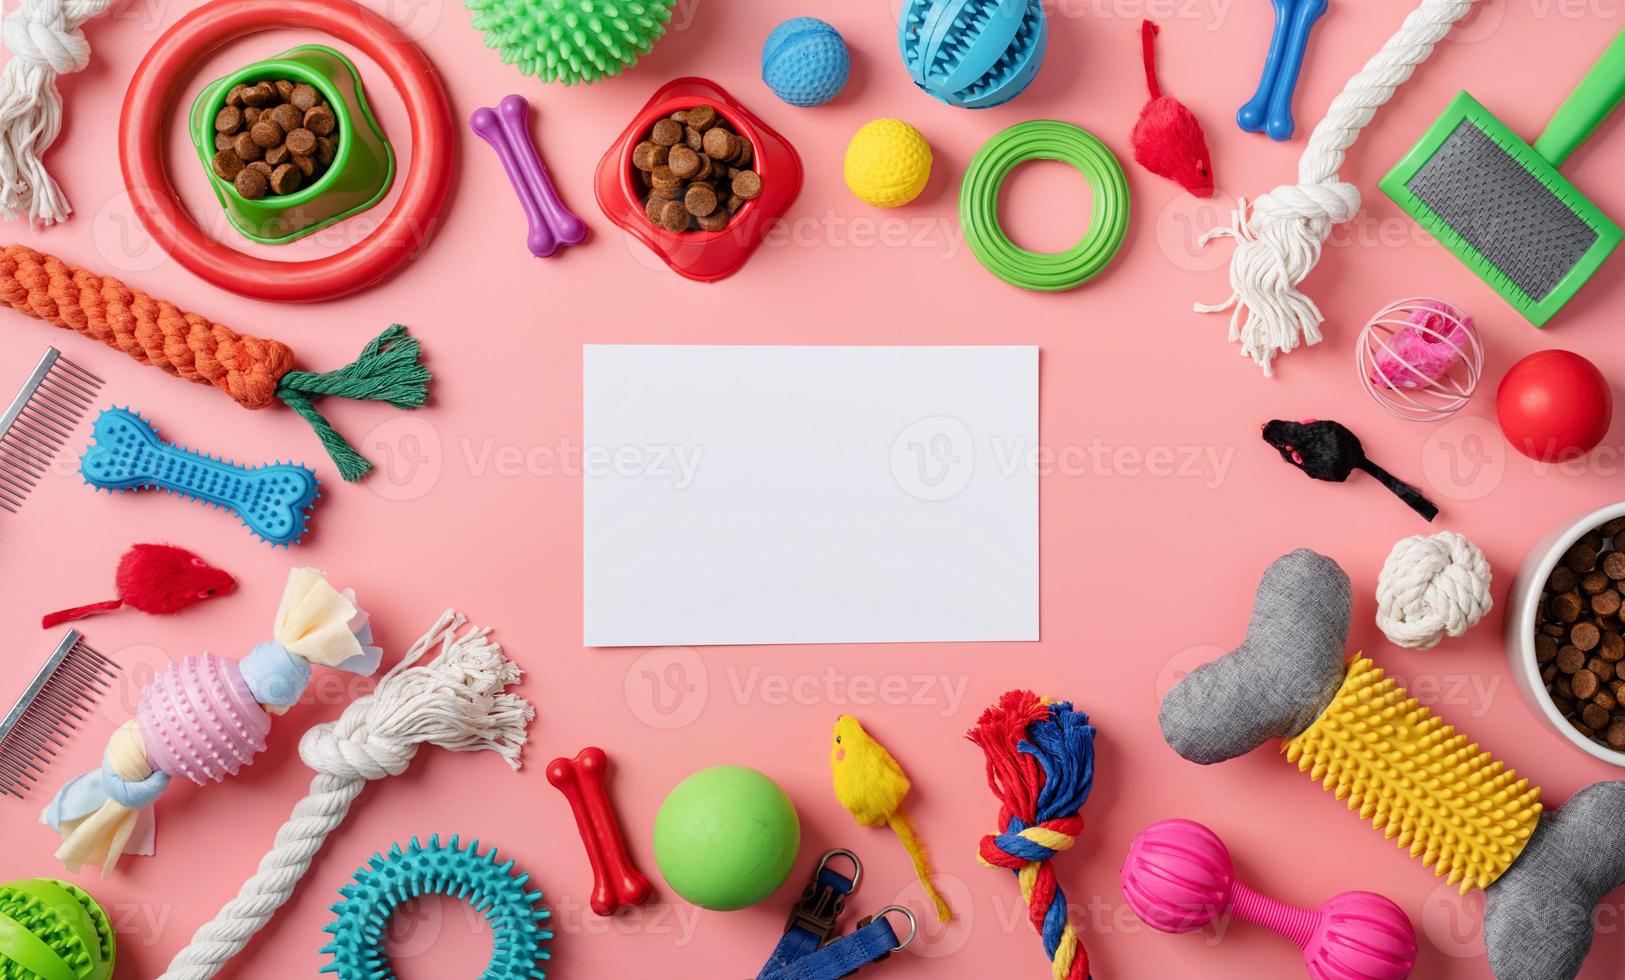 Pet care concept, various pet accessories and tools on pink background with blank paper, flat lay photo